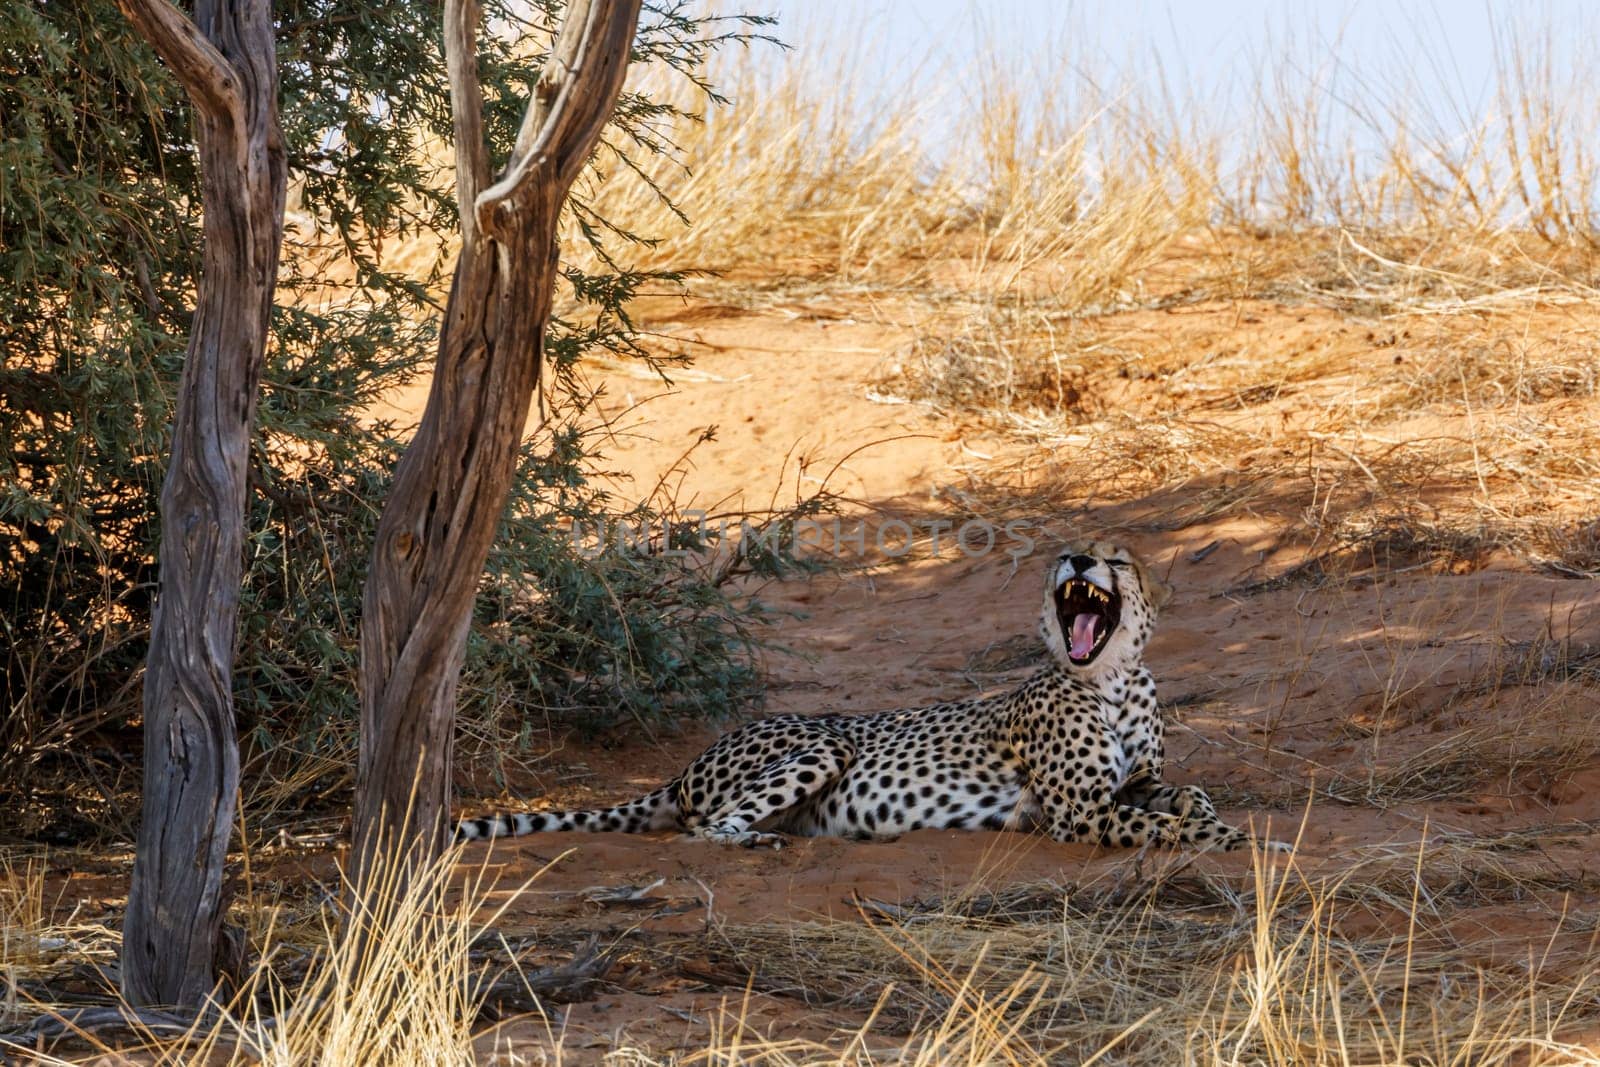 Cheetah chilling down and yawning under tree in Kgalagadi transfrontier park, South Africa ; Specie Acinonyx jubatus family of Felidae